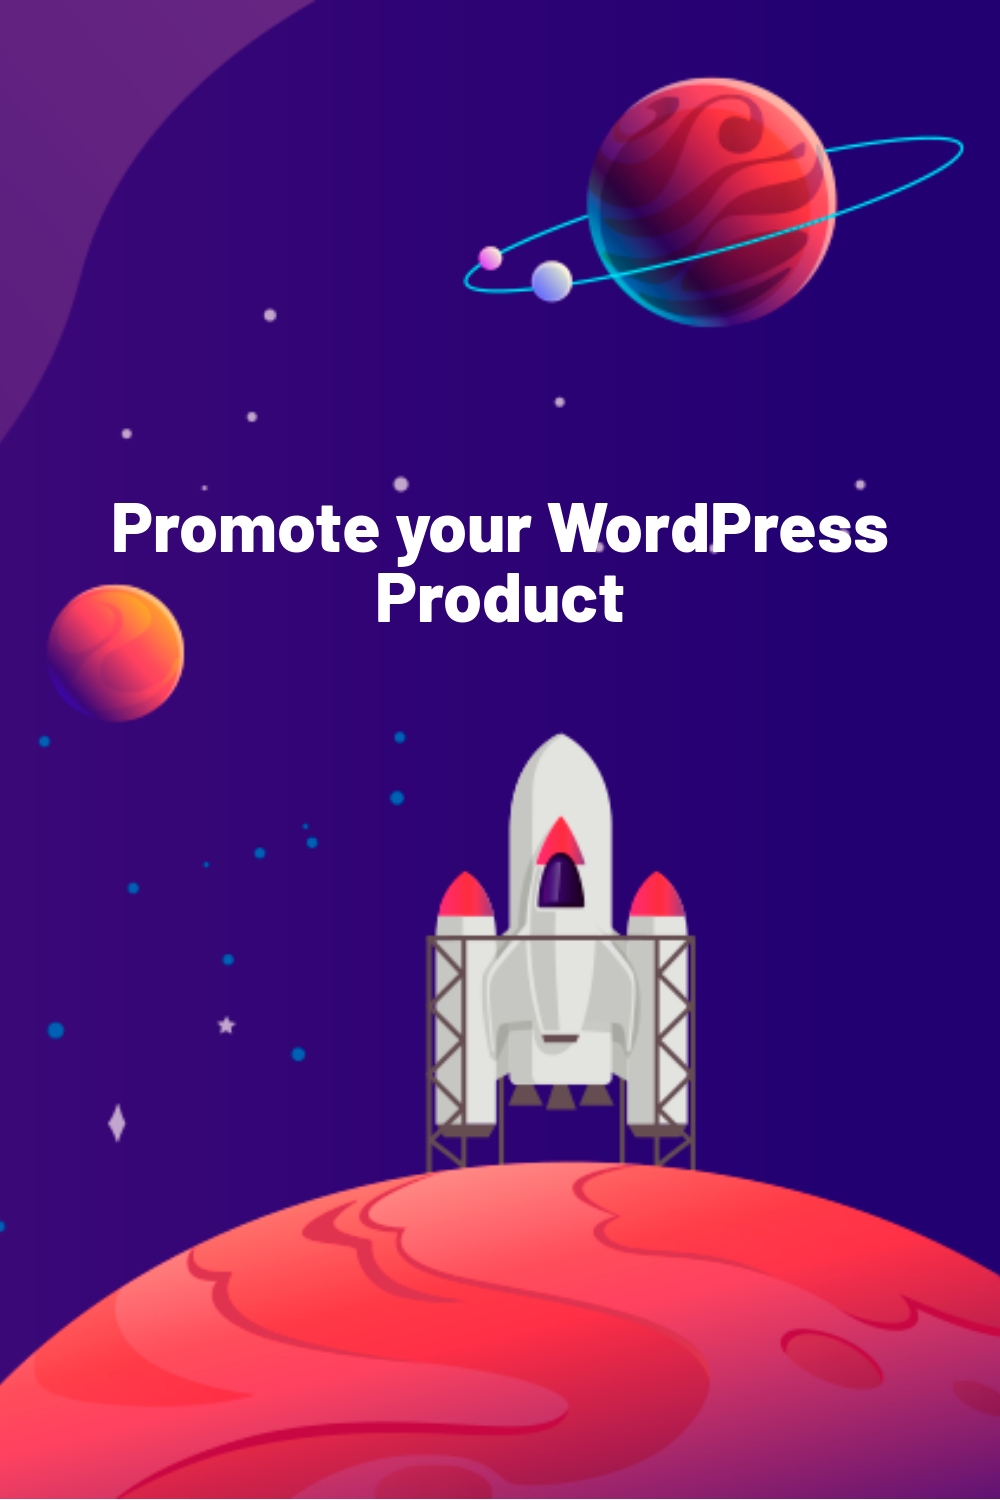 Promote your WordPress Product